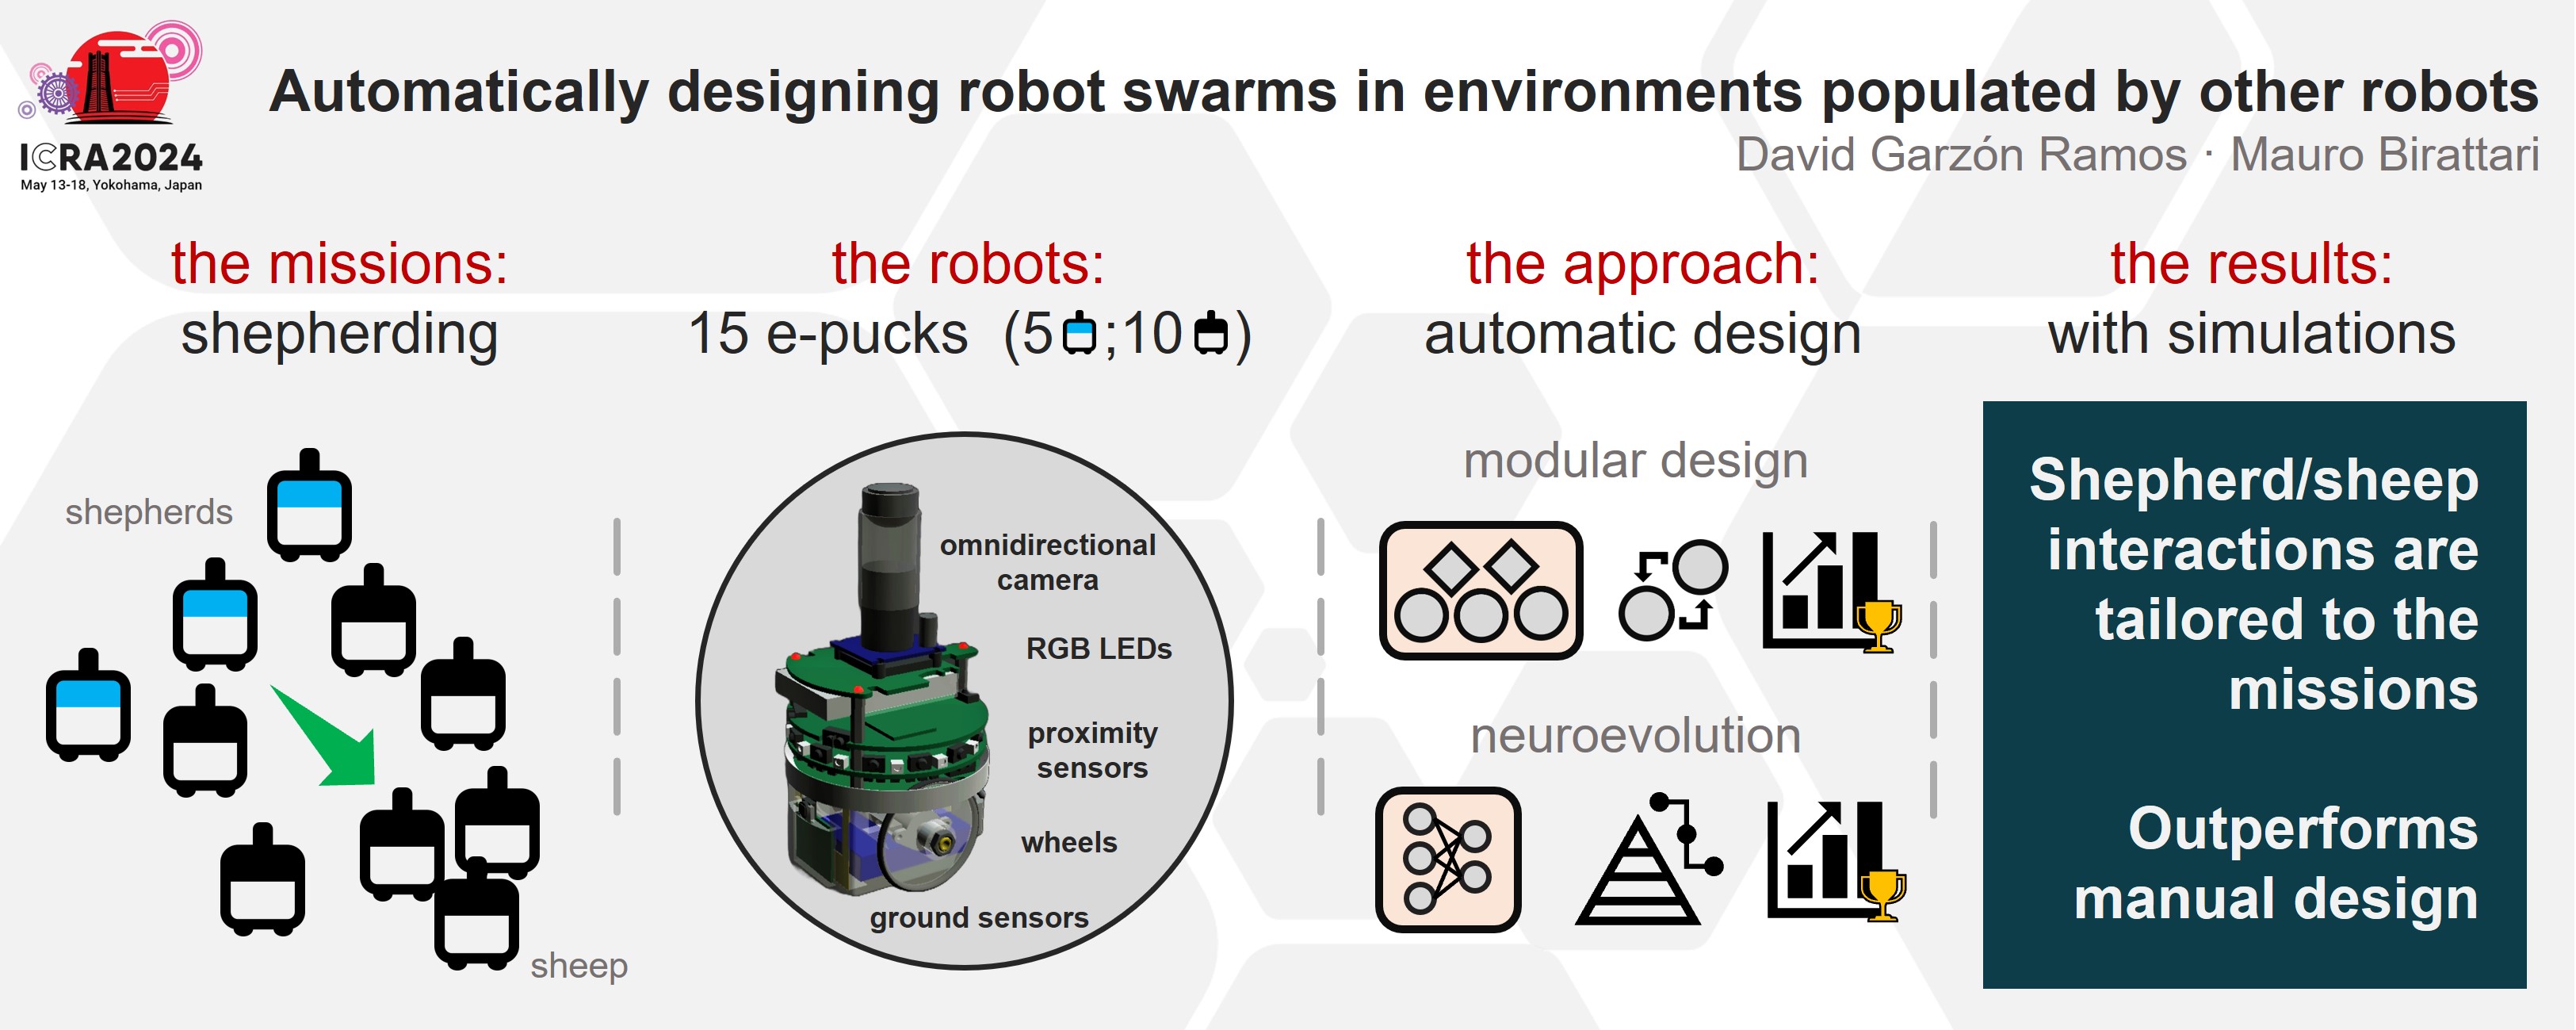 Automatically designing robot swarms in environments populated by other robots: an experiment in robot shepherding